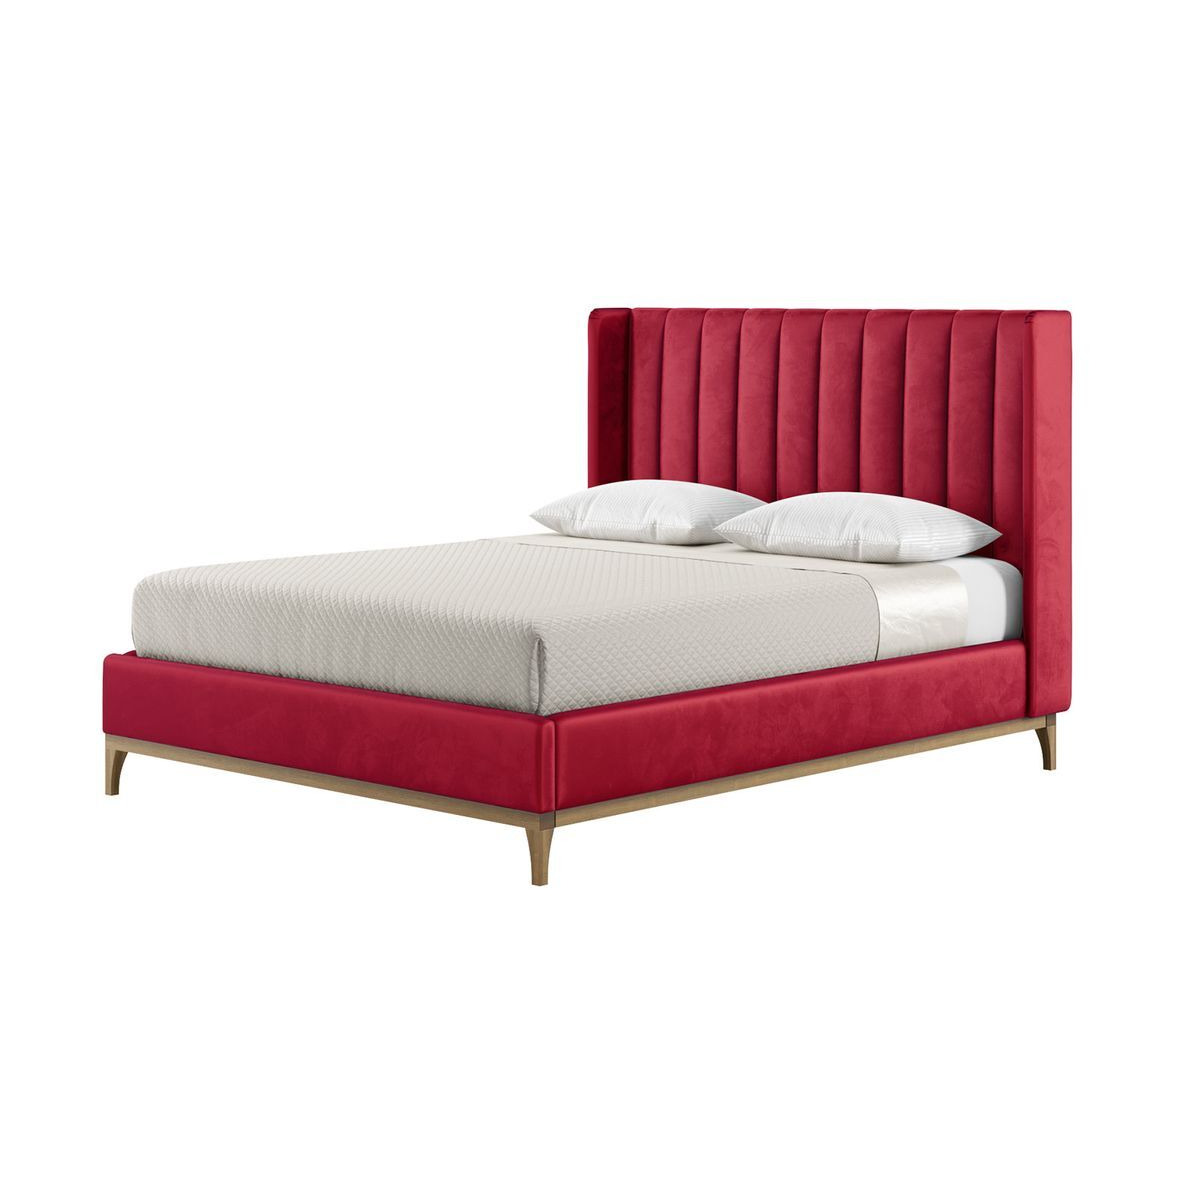 Reese 5ft King Size Bed Frame with fluted vertical stitch wing headboard, dark red, Leg colour: wax black - image 1